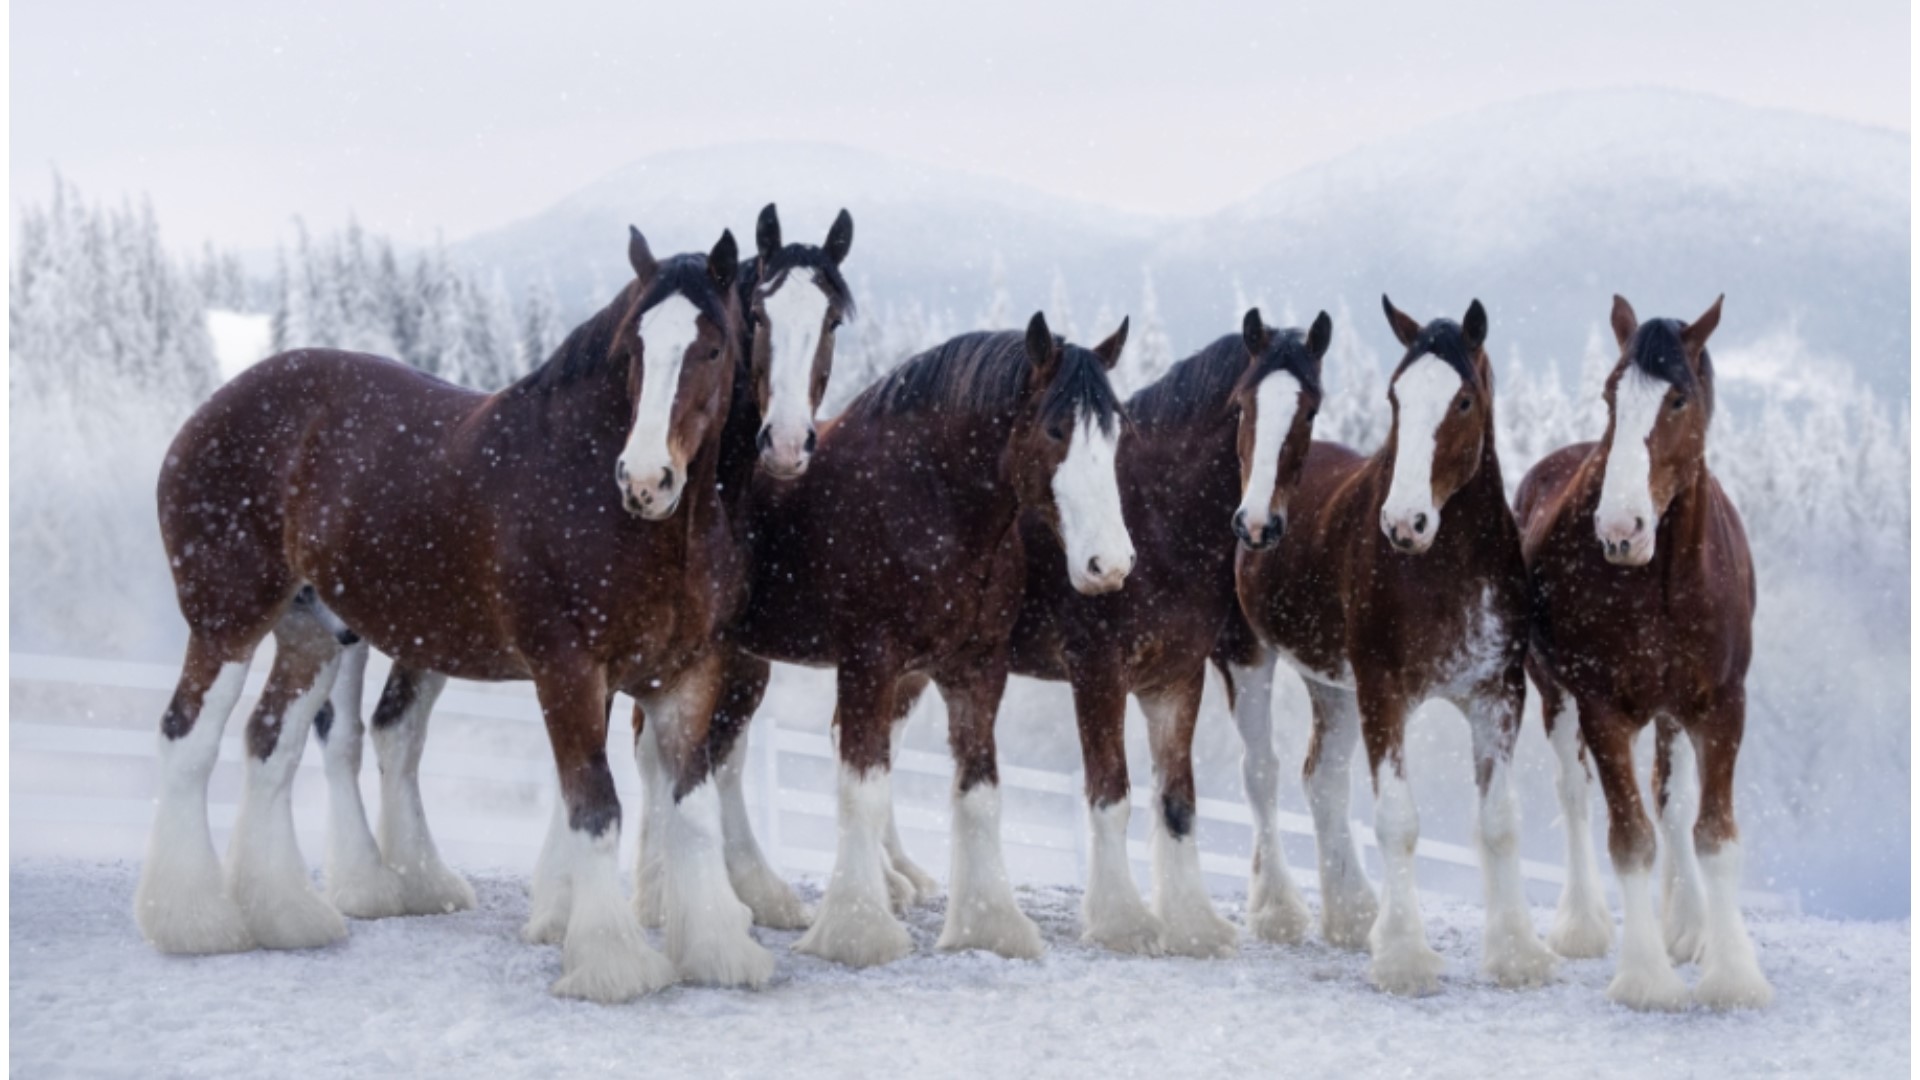 Anheuser-Busch offered fans a sneak peek of its Super Bowl LVIII commercial slot on Thursday. This year's ad includes the Clydesdales.